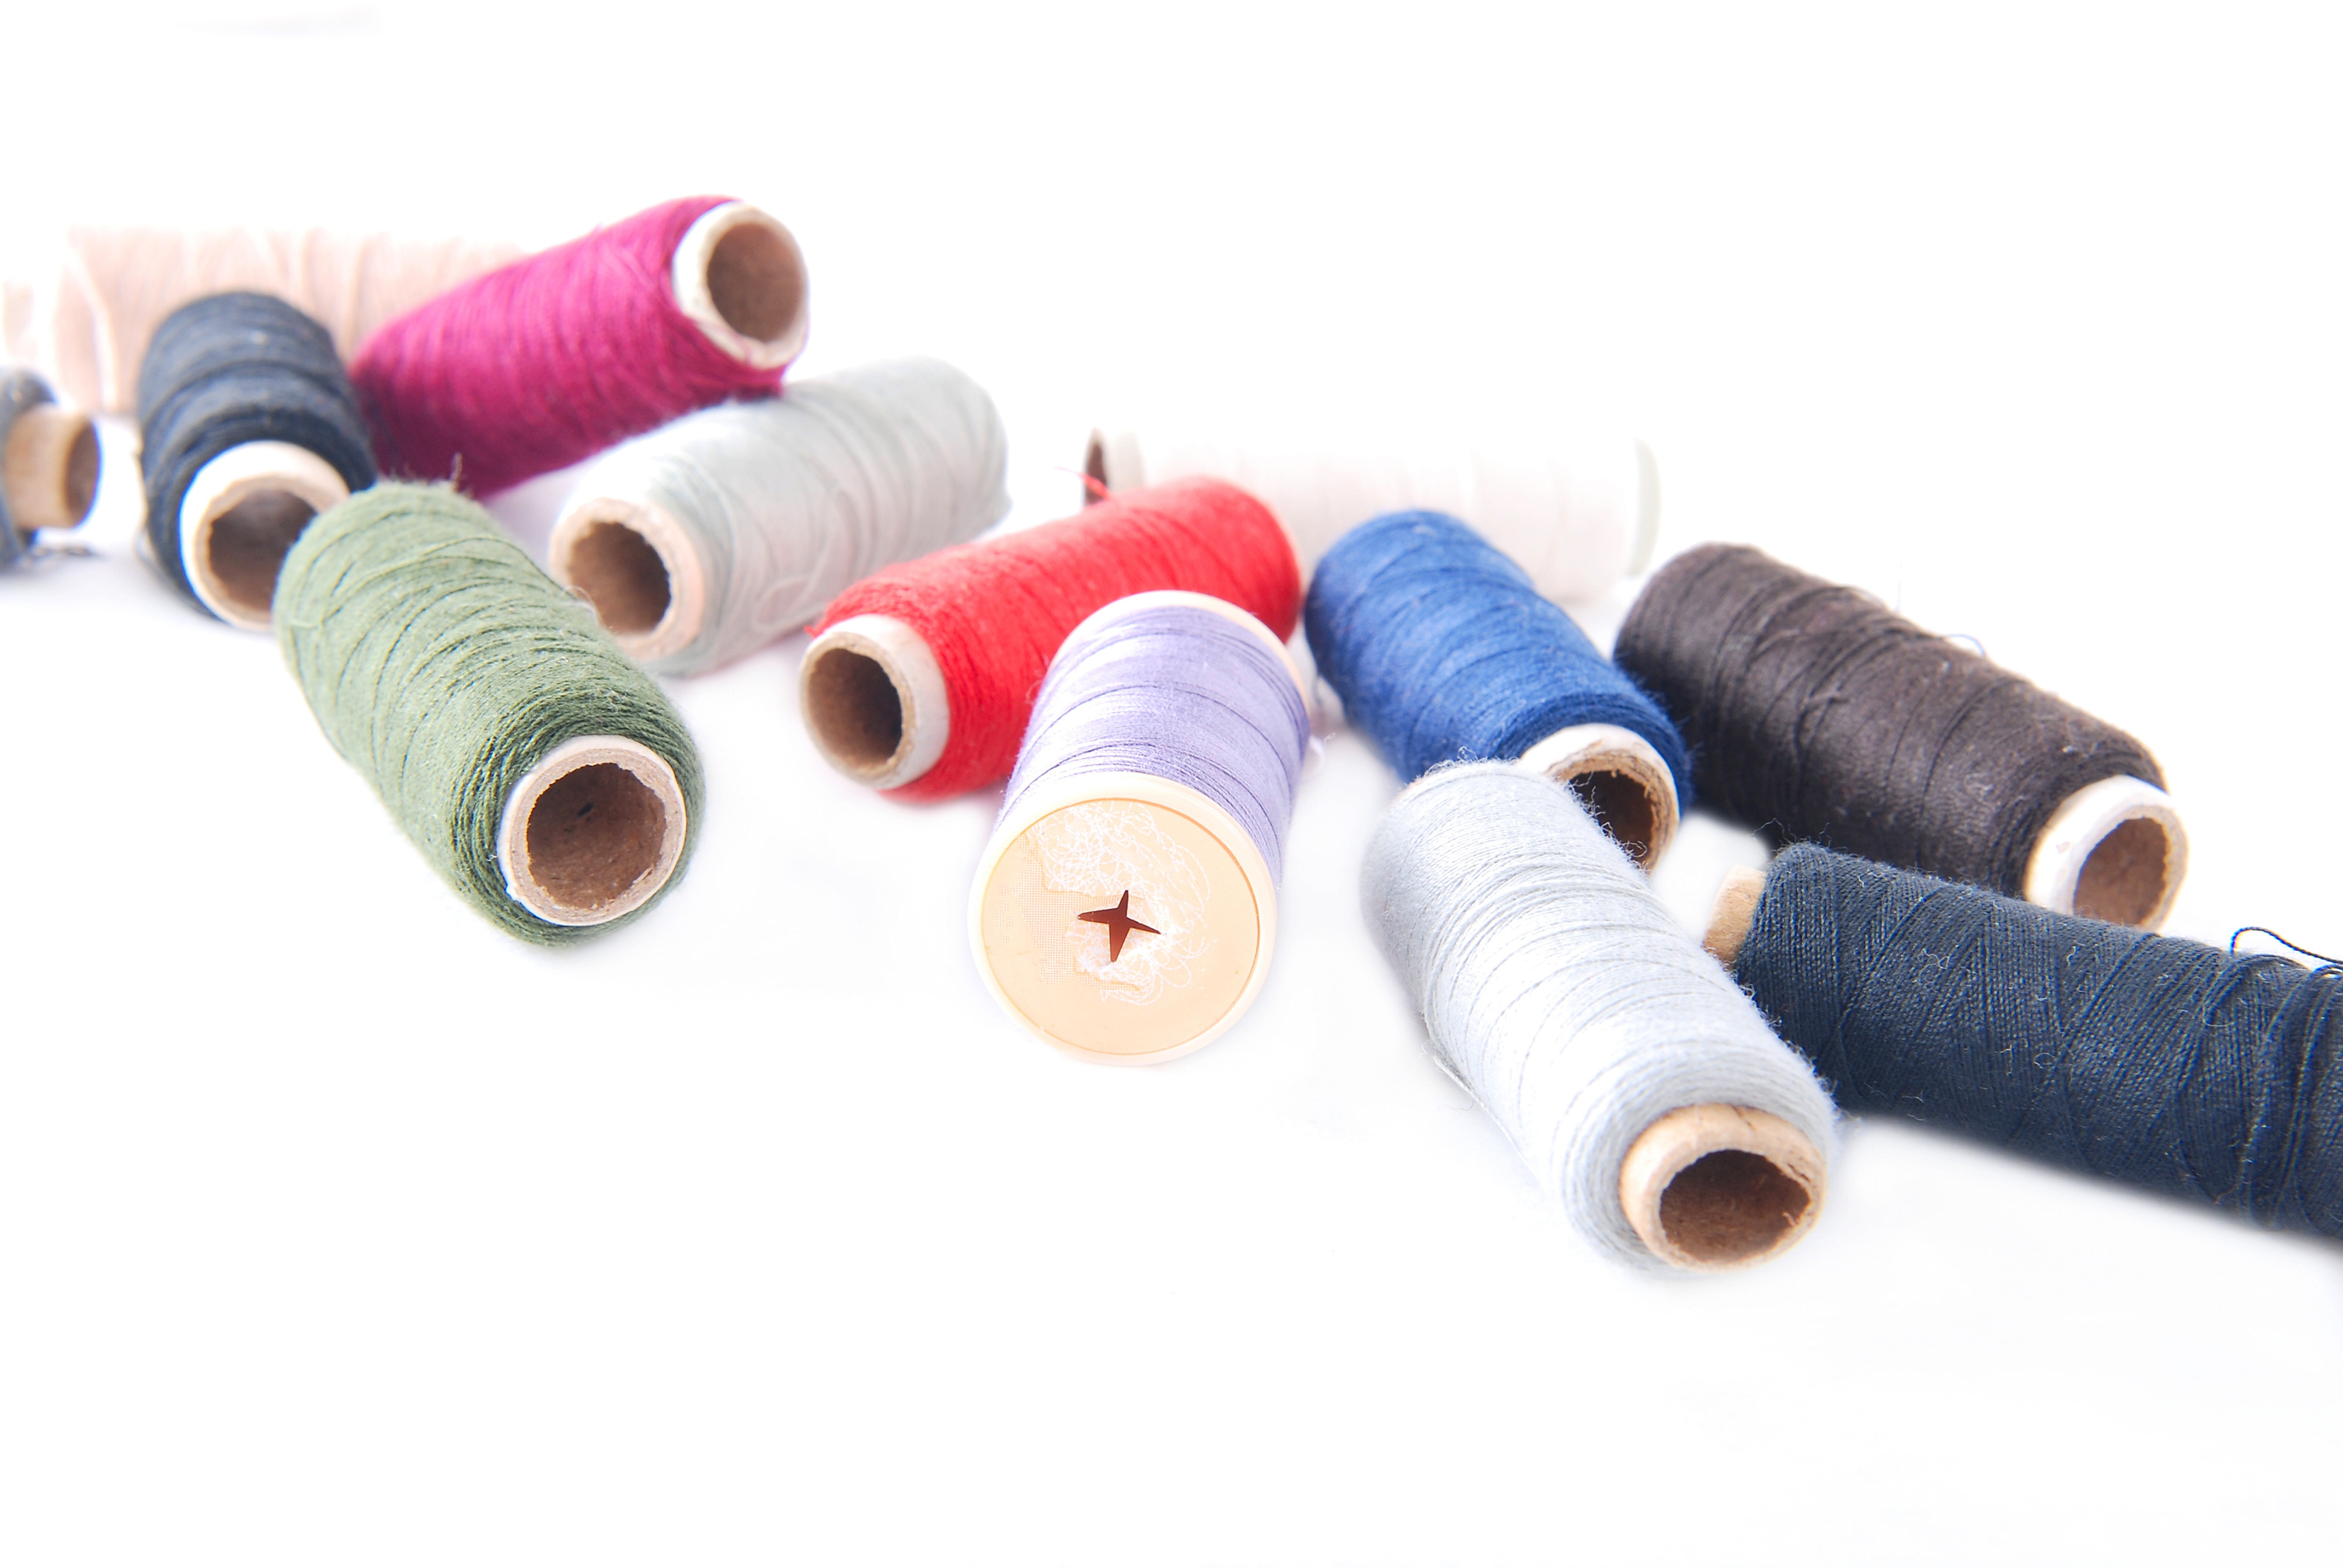 thread, textile, spool, sewing, sewing item, multi colored